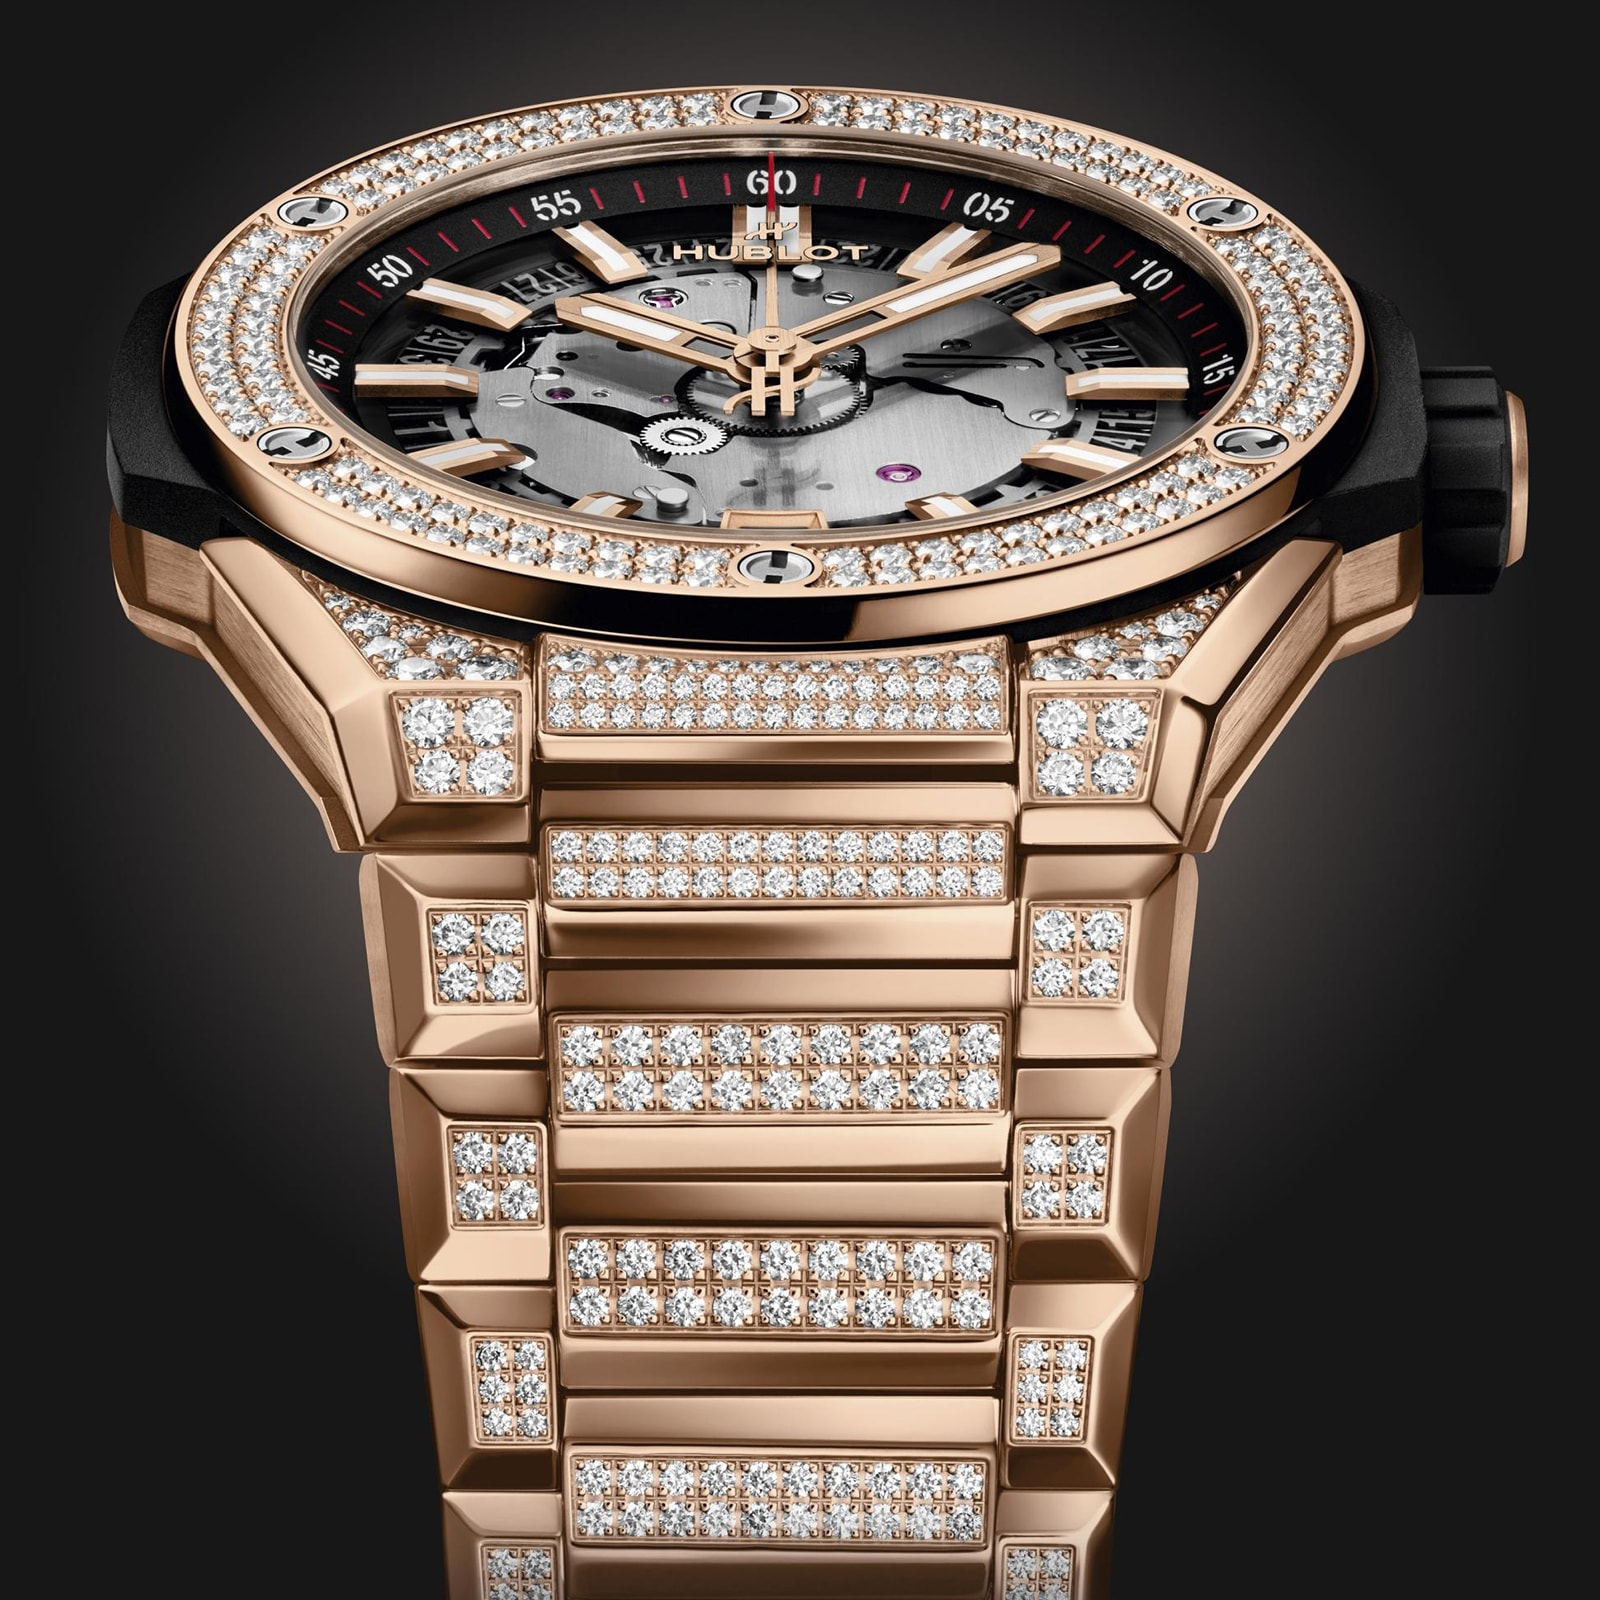 Big Bang Integrated Time Only 40mm - King Gold Pave